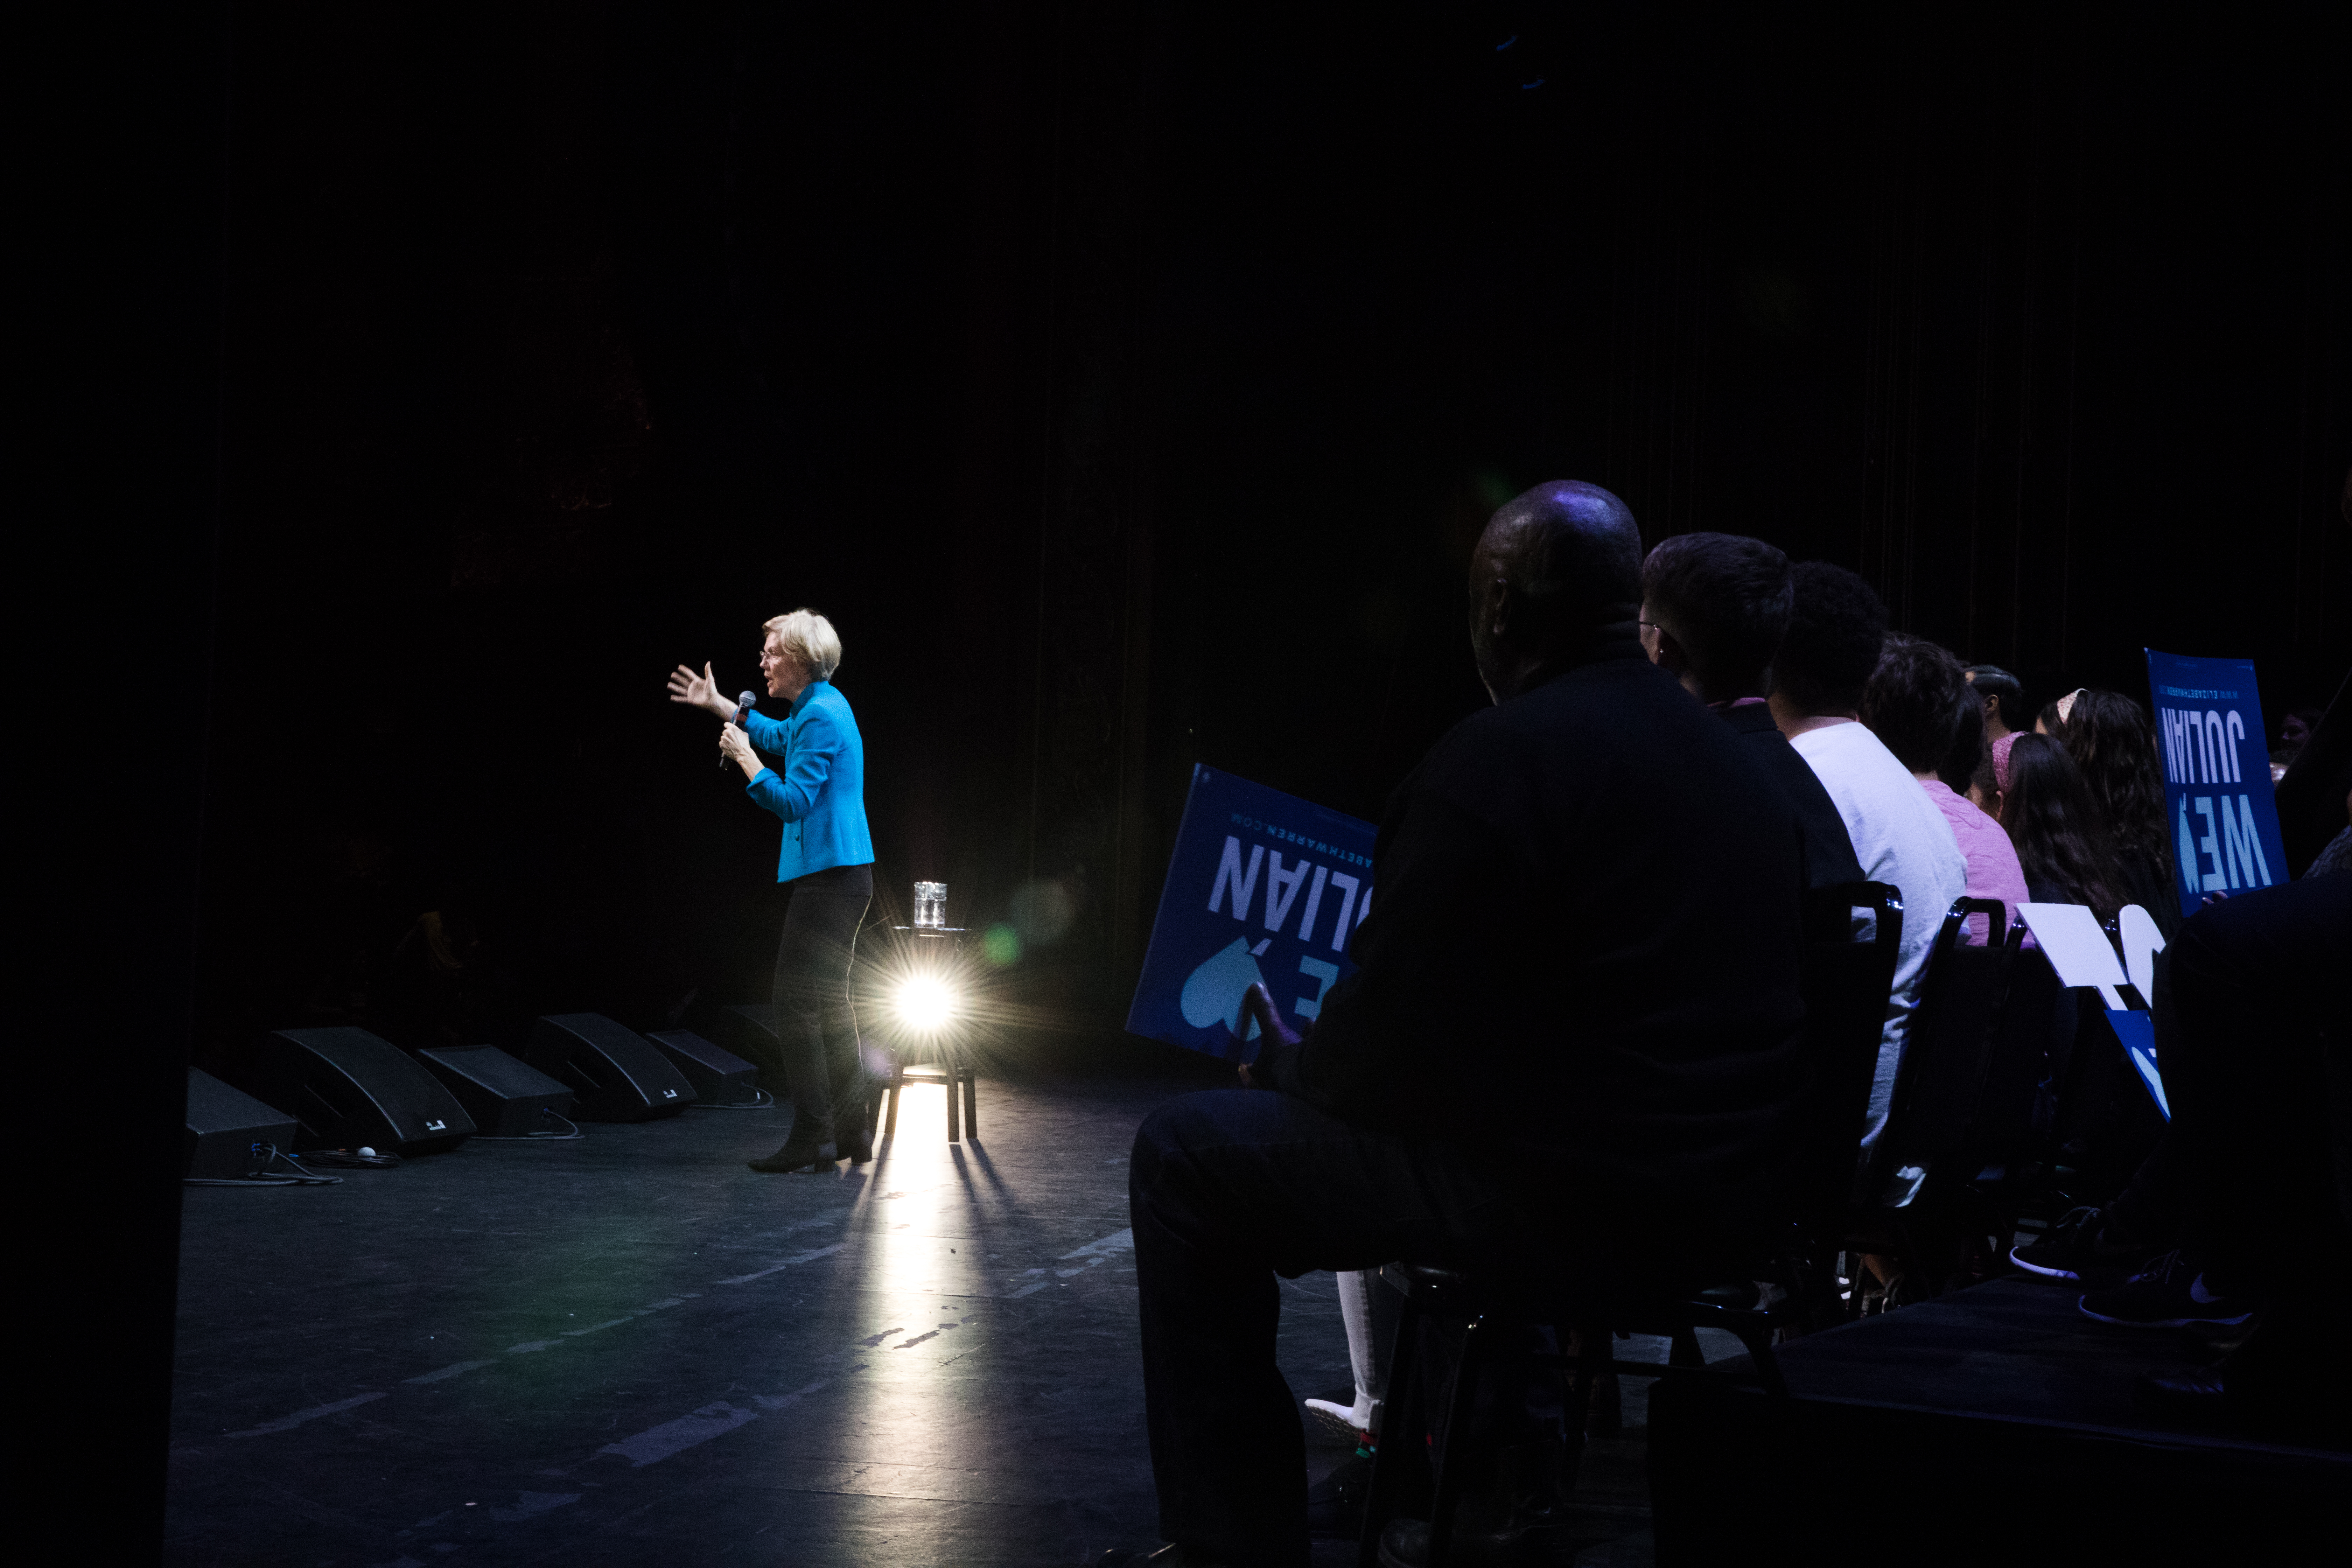 Warren laid out many of her policy ideas to a roaring crowd.